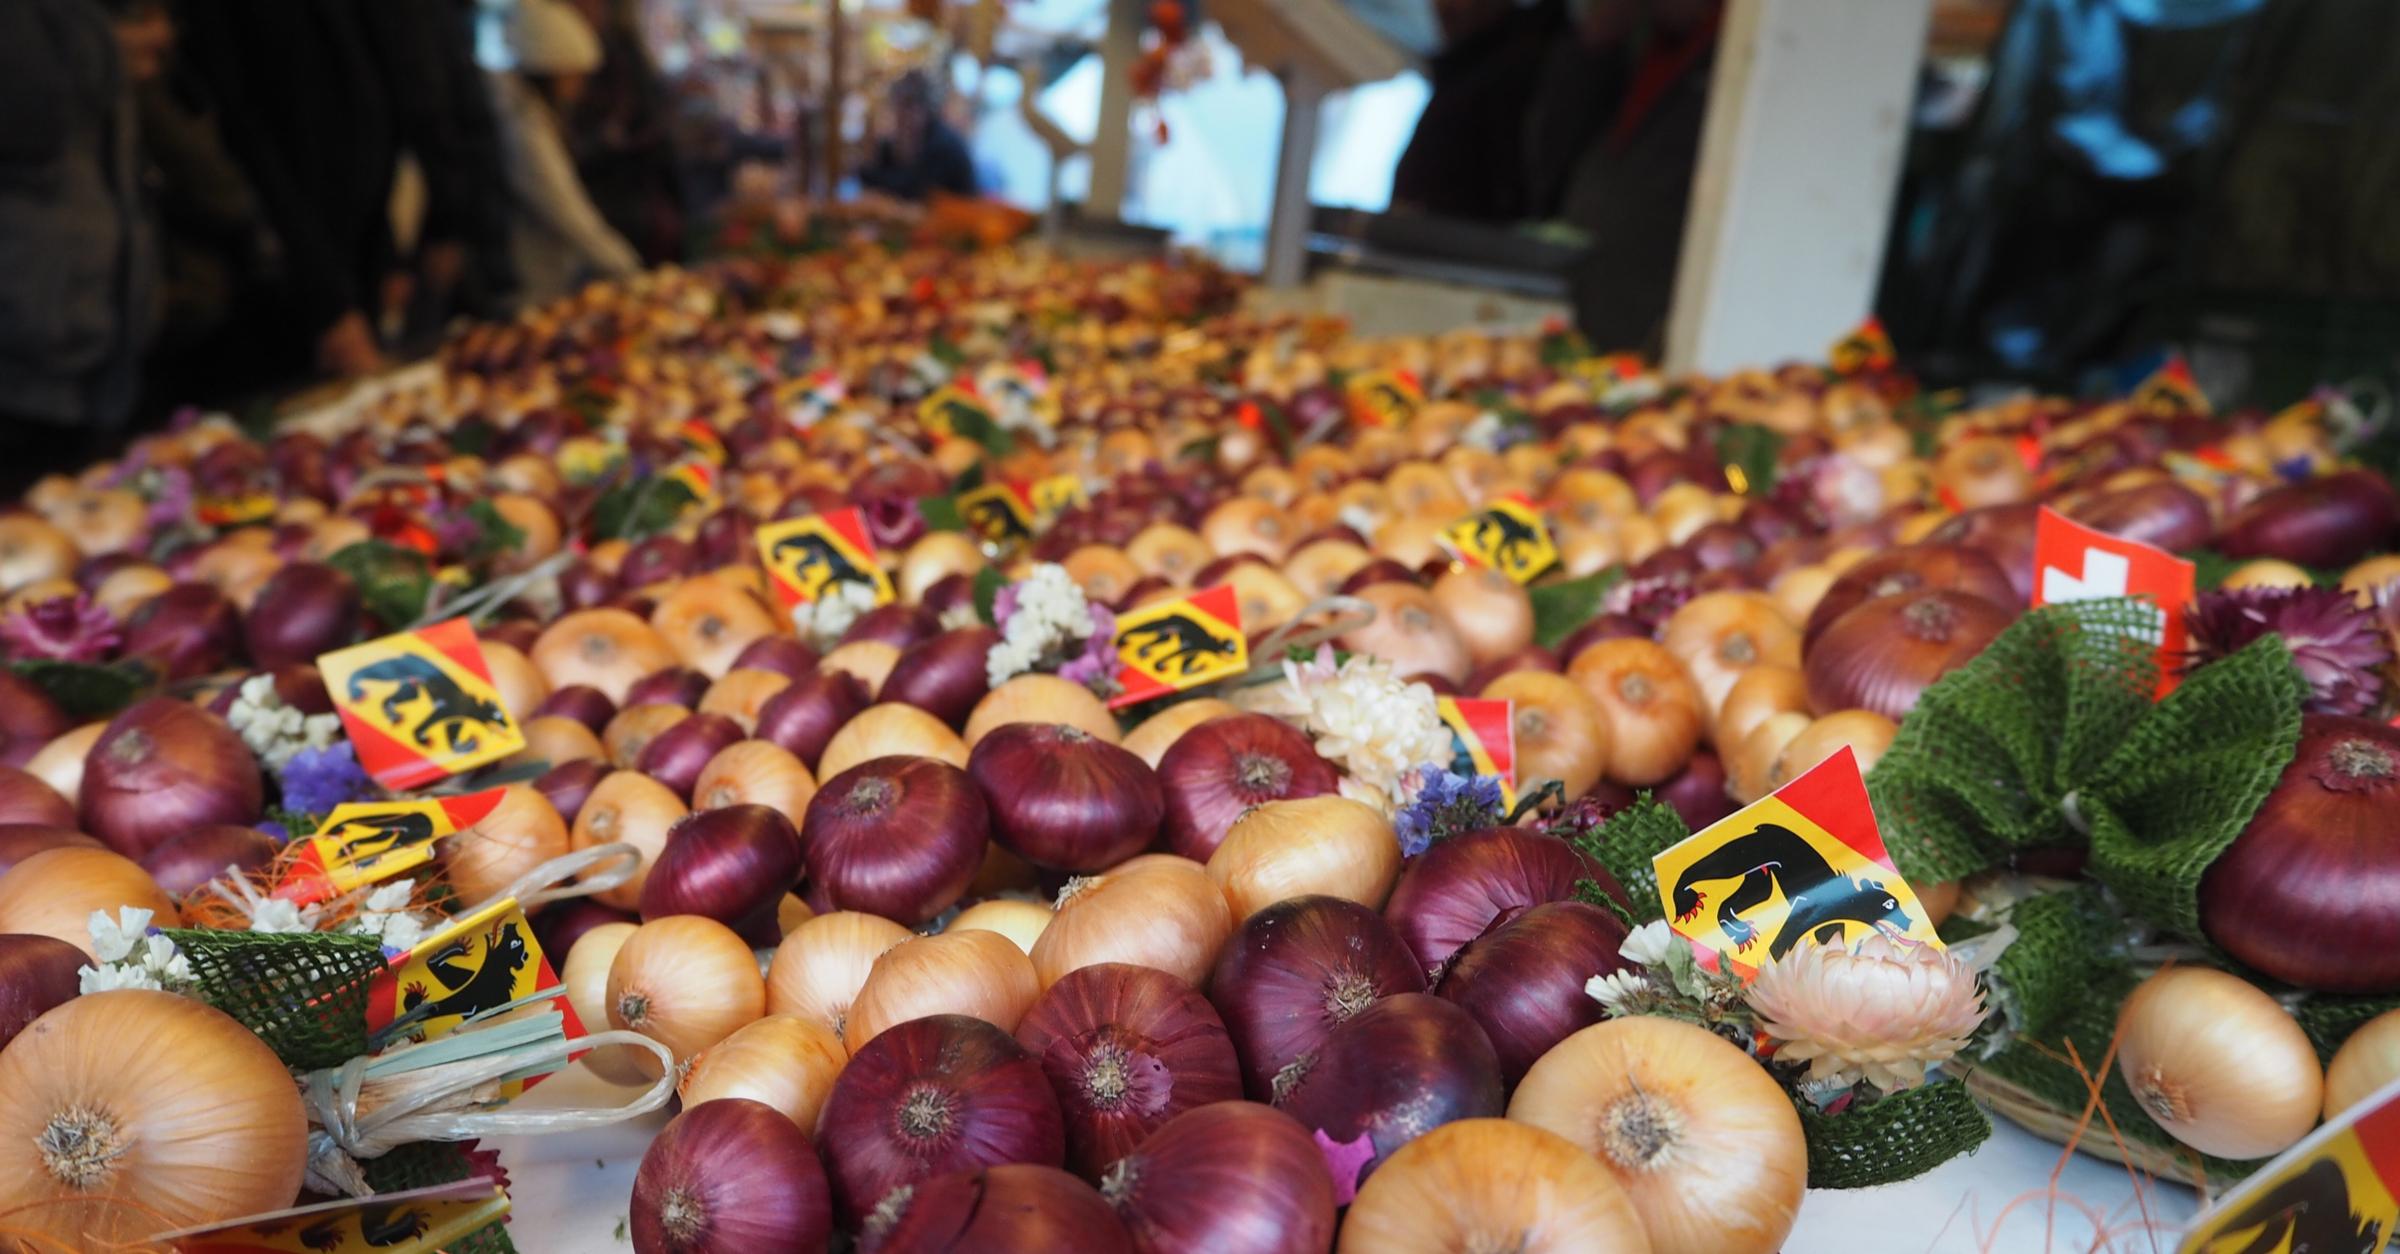 Everything you need to know about Bern's traditional Onion Market